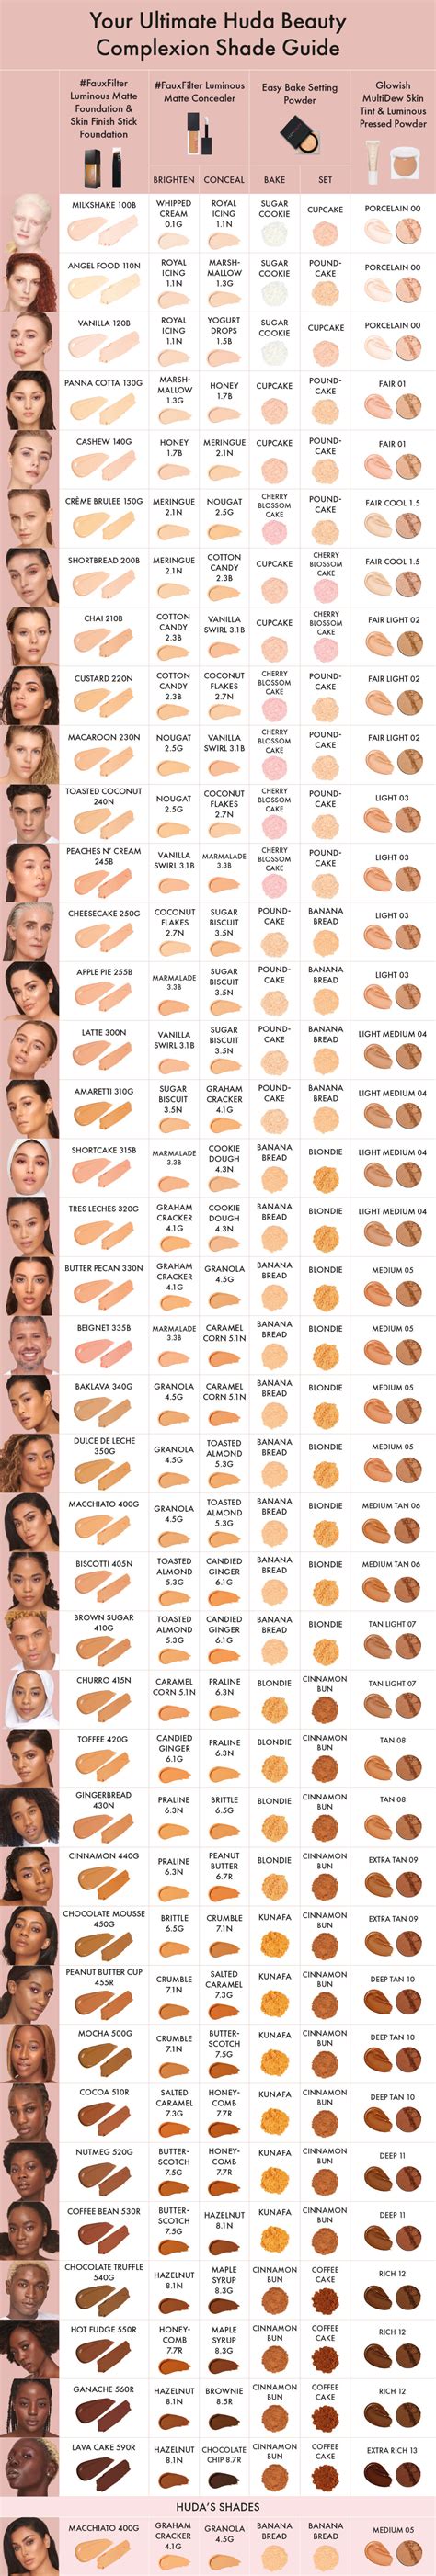 Your Ultimate Huda Beauty Complexion Shade Matching Guide Blog Huda